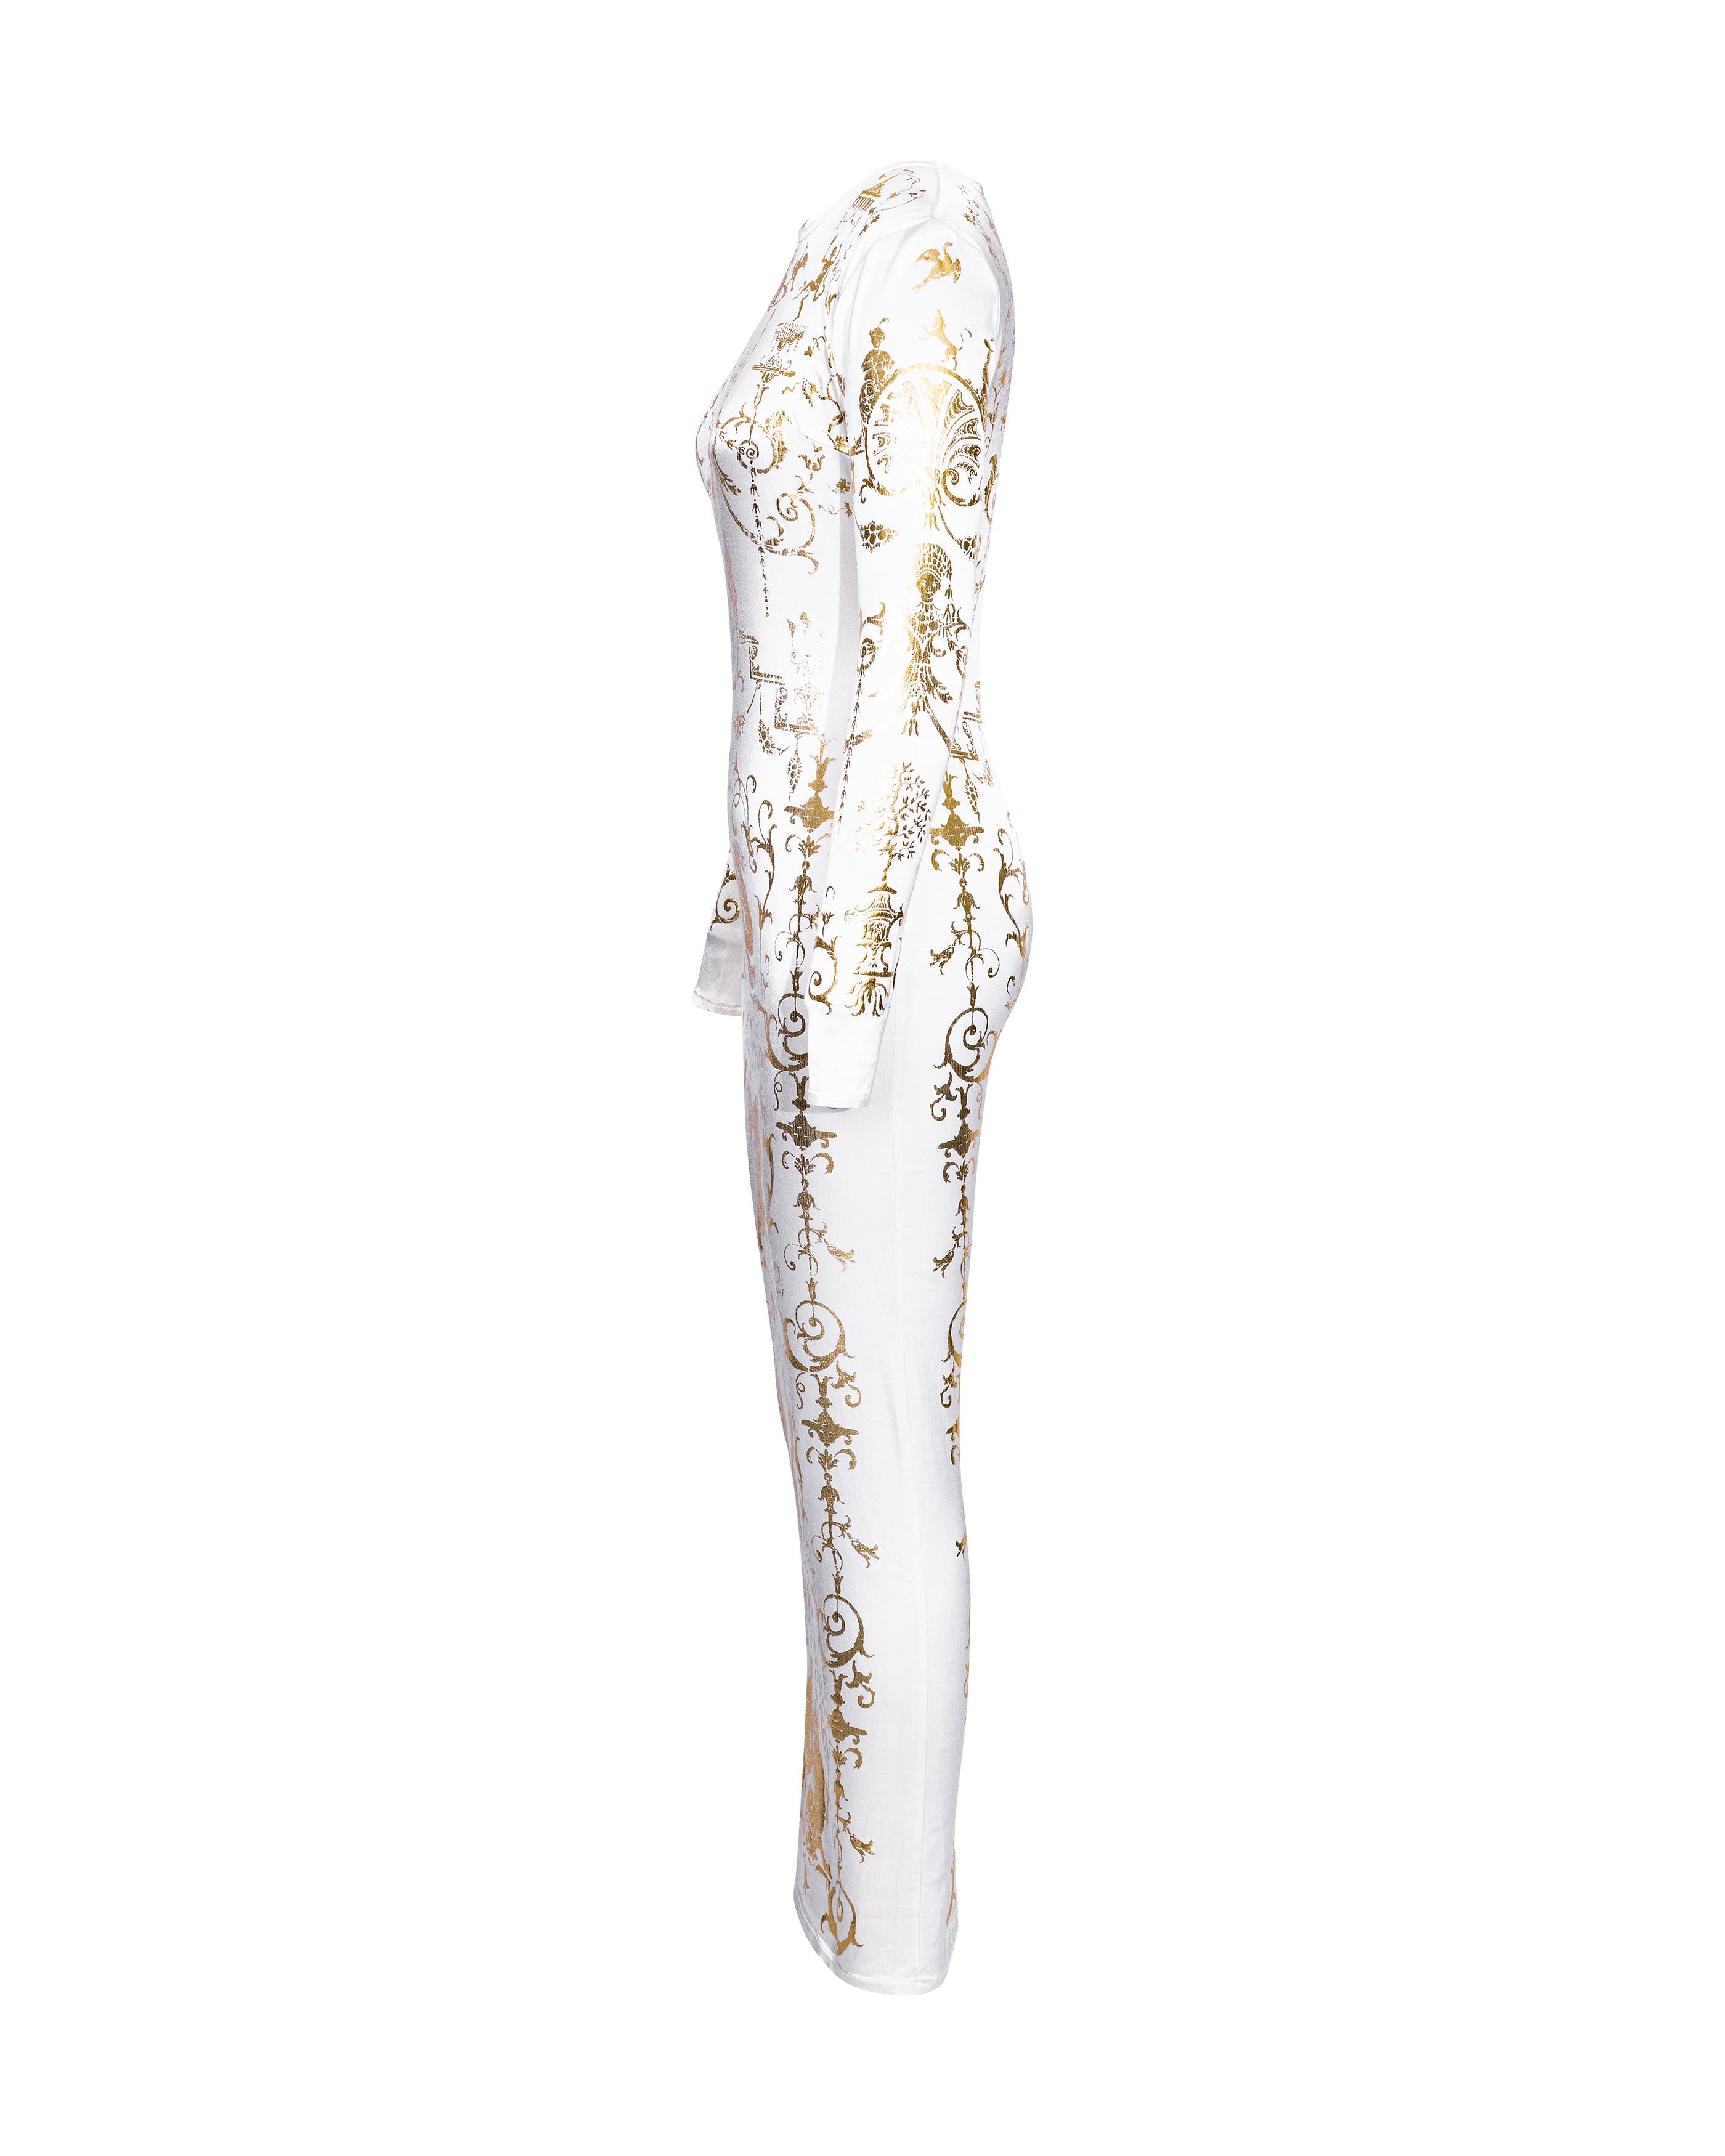 Women's A/W 1991 Vivienne Westwood White and Gold Boulle Print Gown For Sale